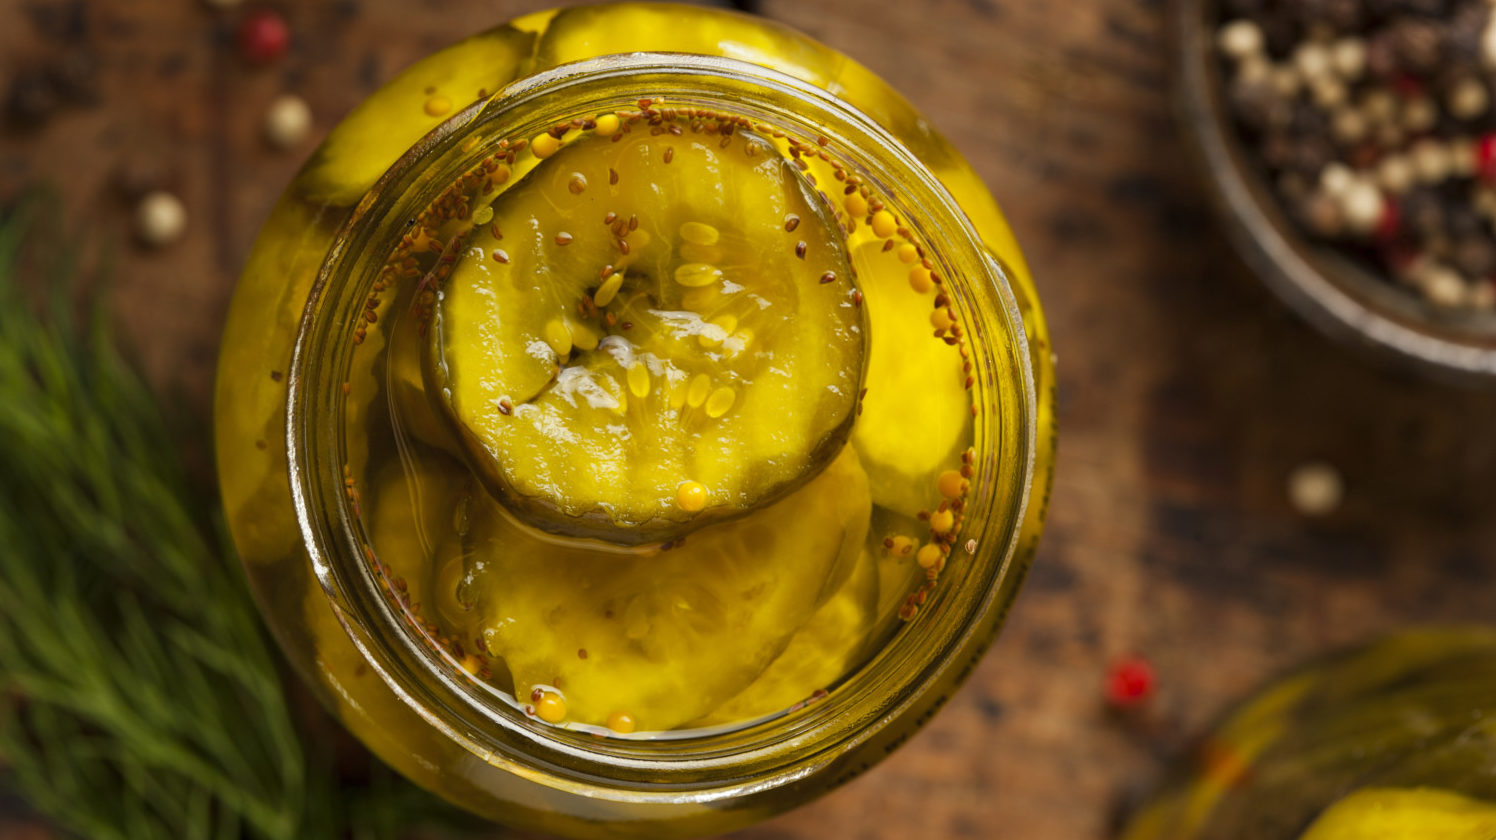 Pickle slices homemade in a jar